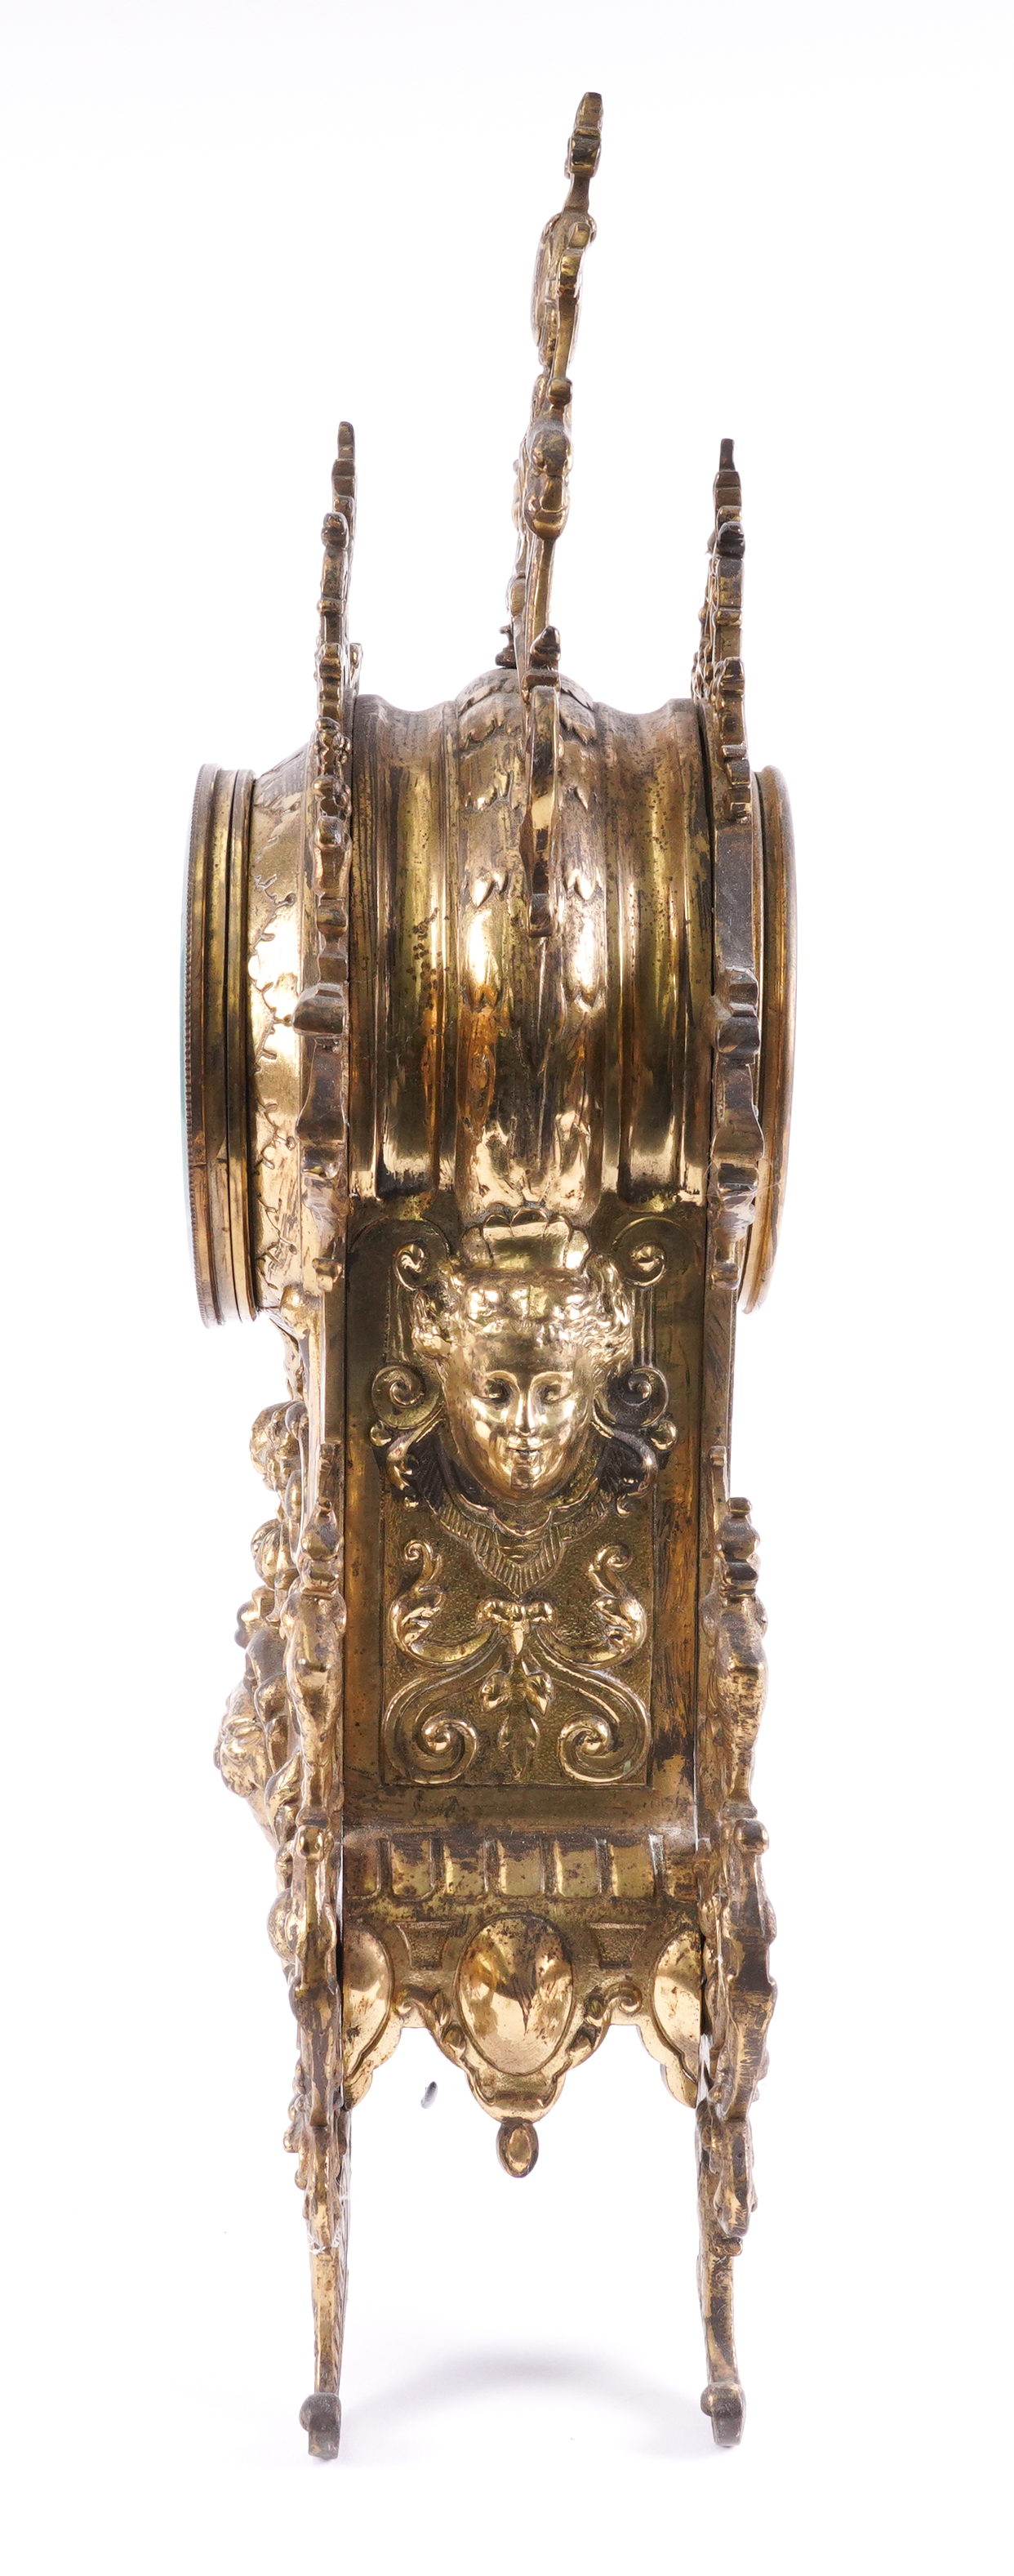 A FRENCH GILT-METAL MOUNTED MANTEL CLOCK - Image 2 of 5